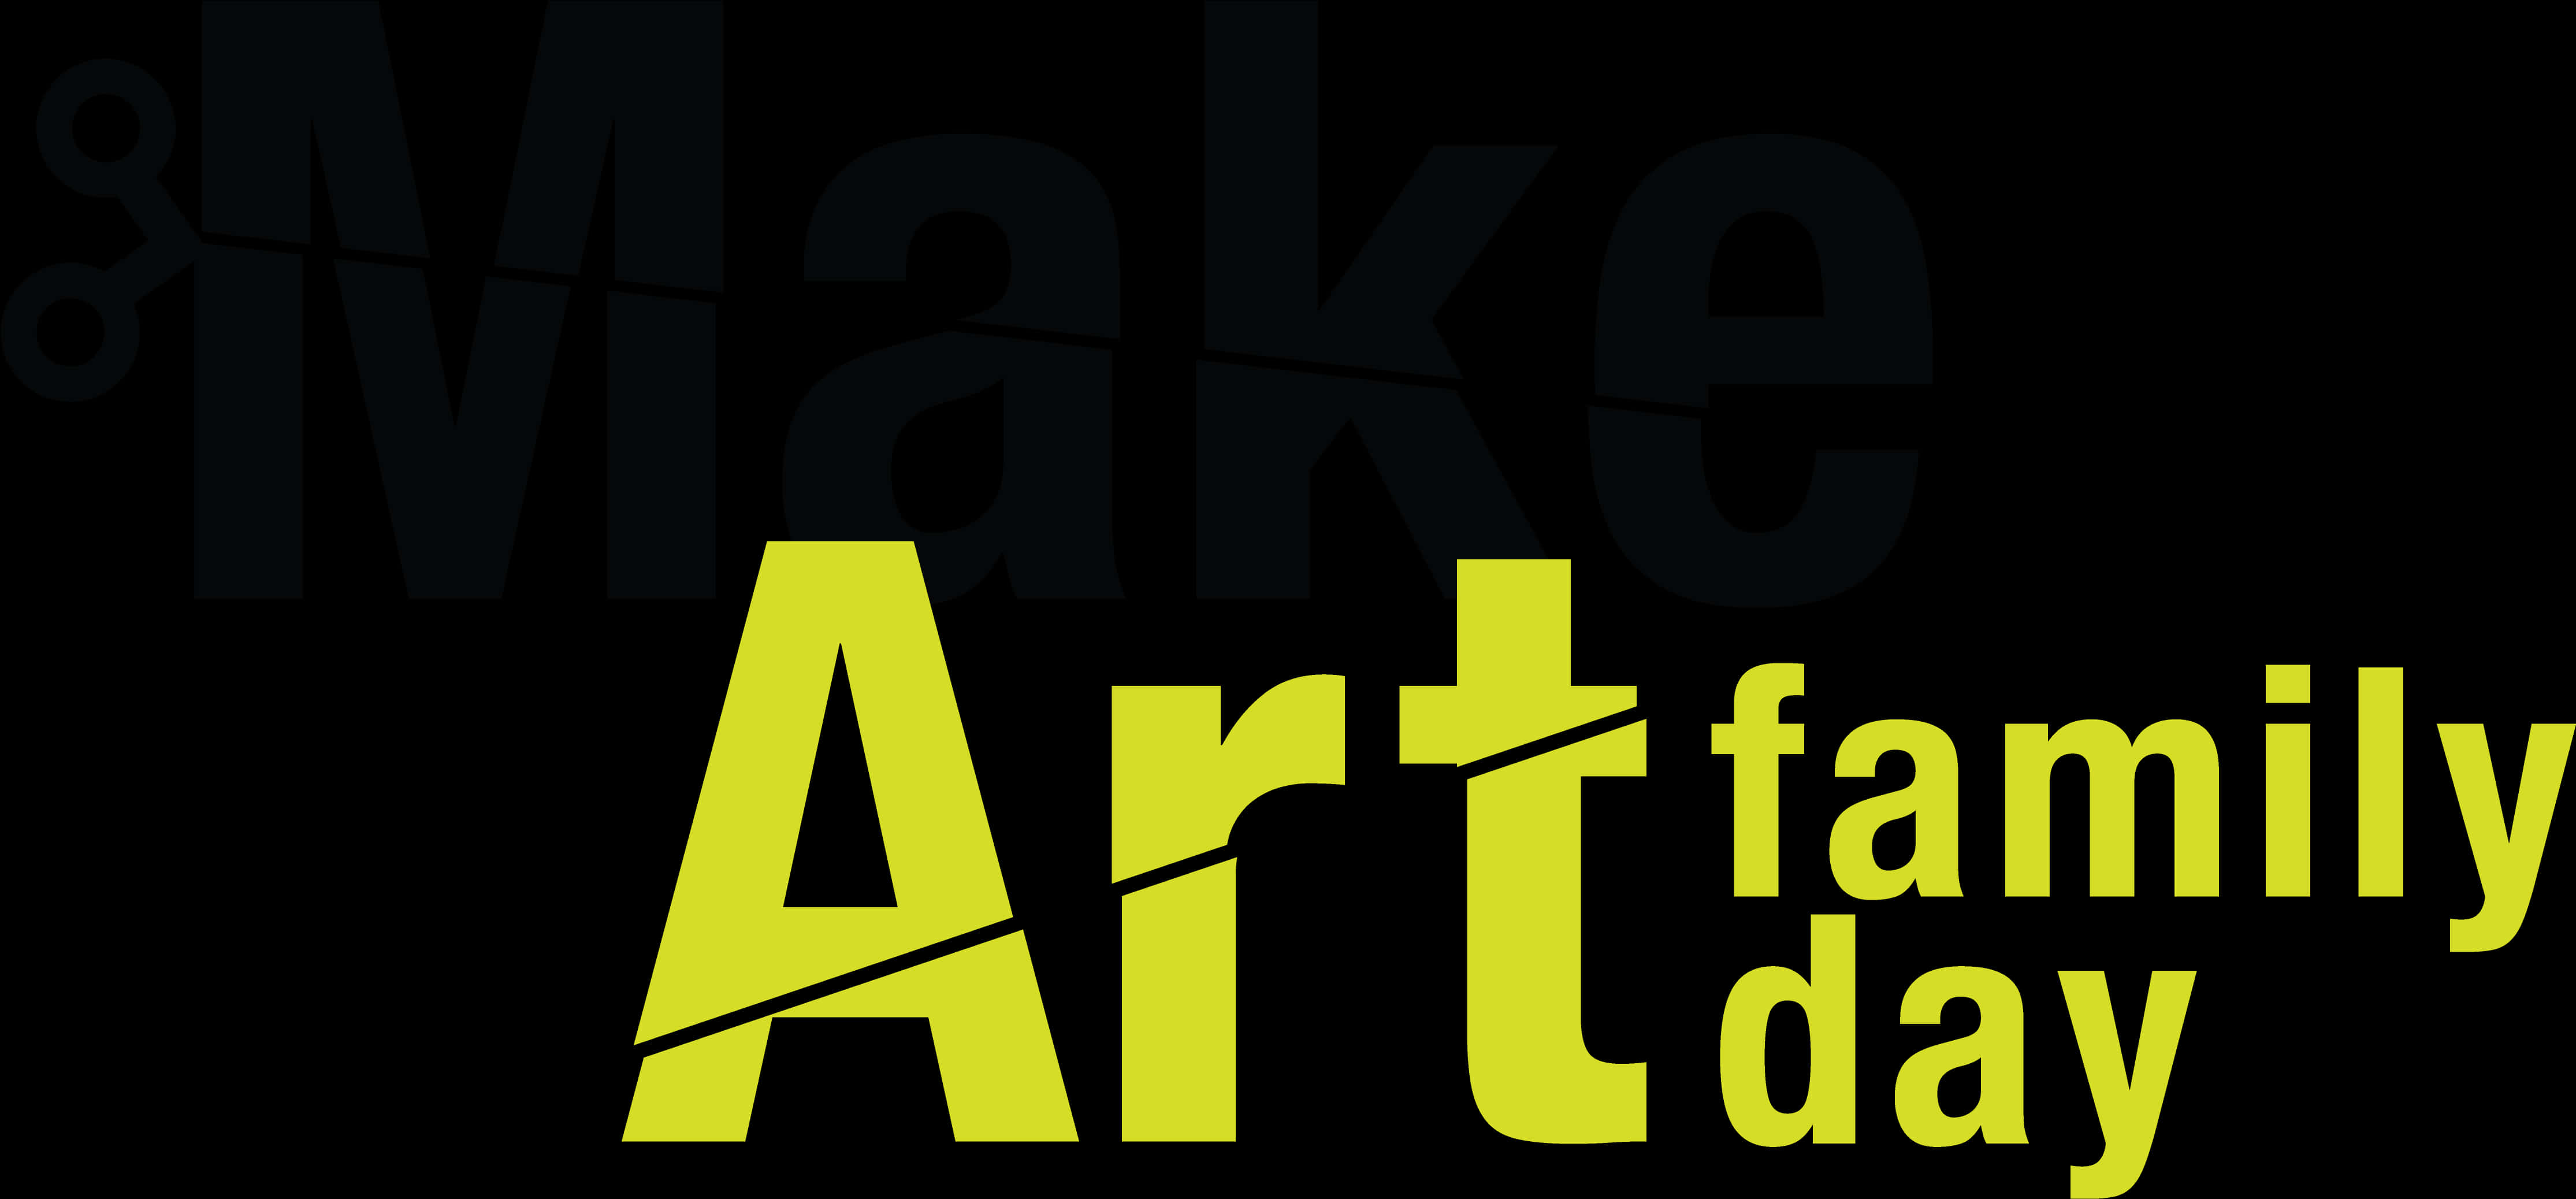 Make Art Family Day Graphic PNG